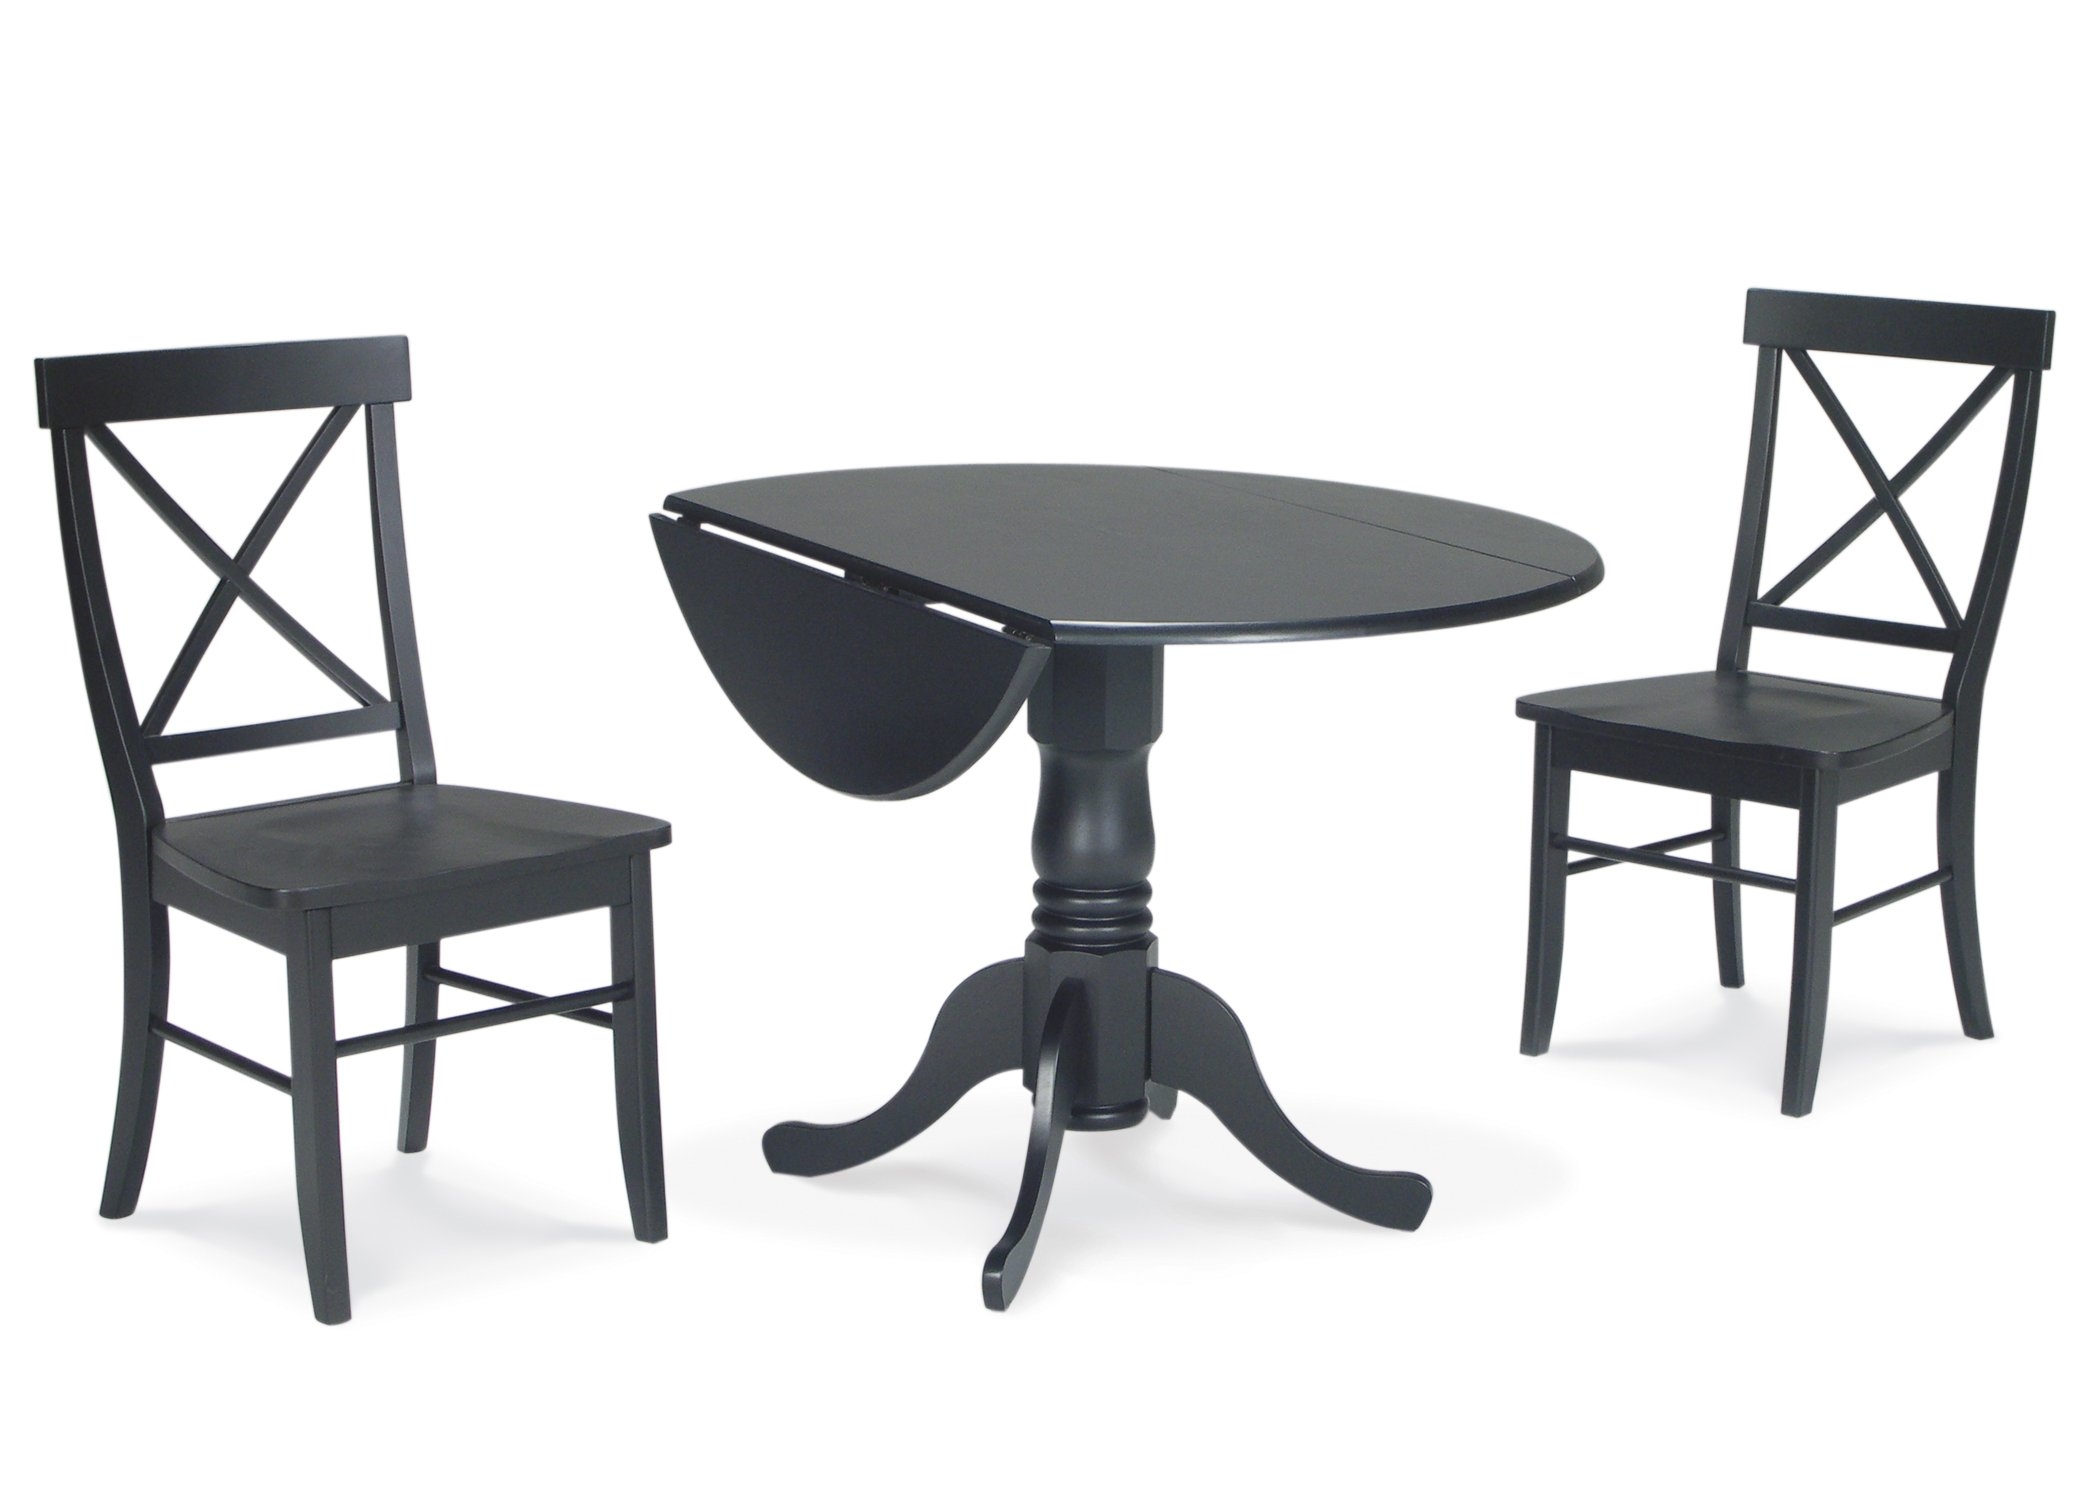 International Concepts 3-Piece 42-Inch Dual Drop Leaf Pedestal Table with 2 X-Back Chairs, Black Finish